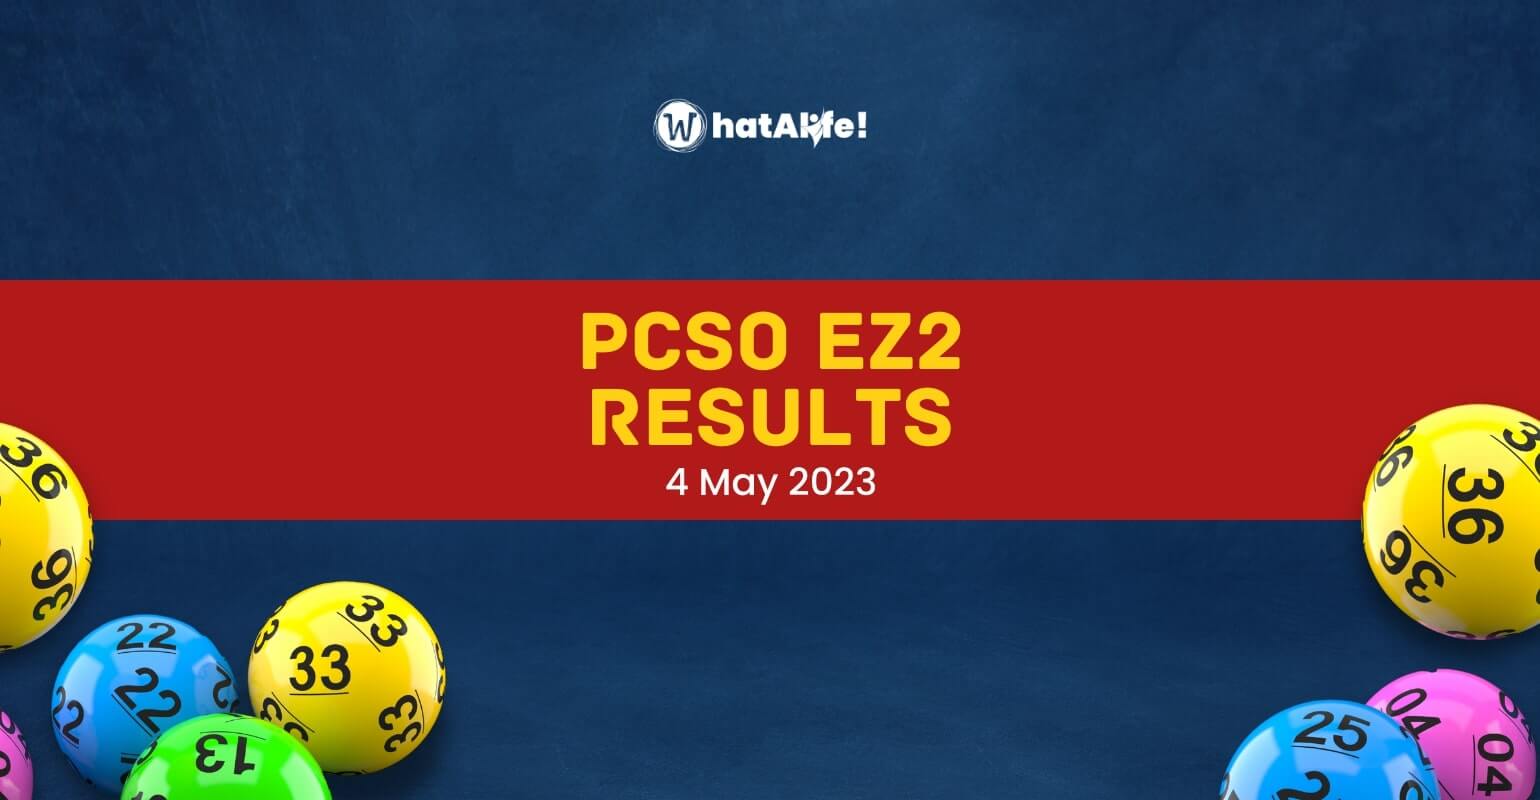 EZ2 2D RESULTS May 4, 2023 (Thursday) WhatALife!